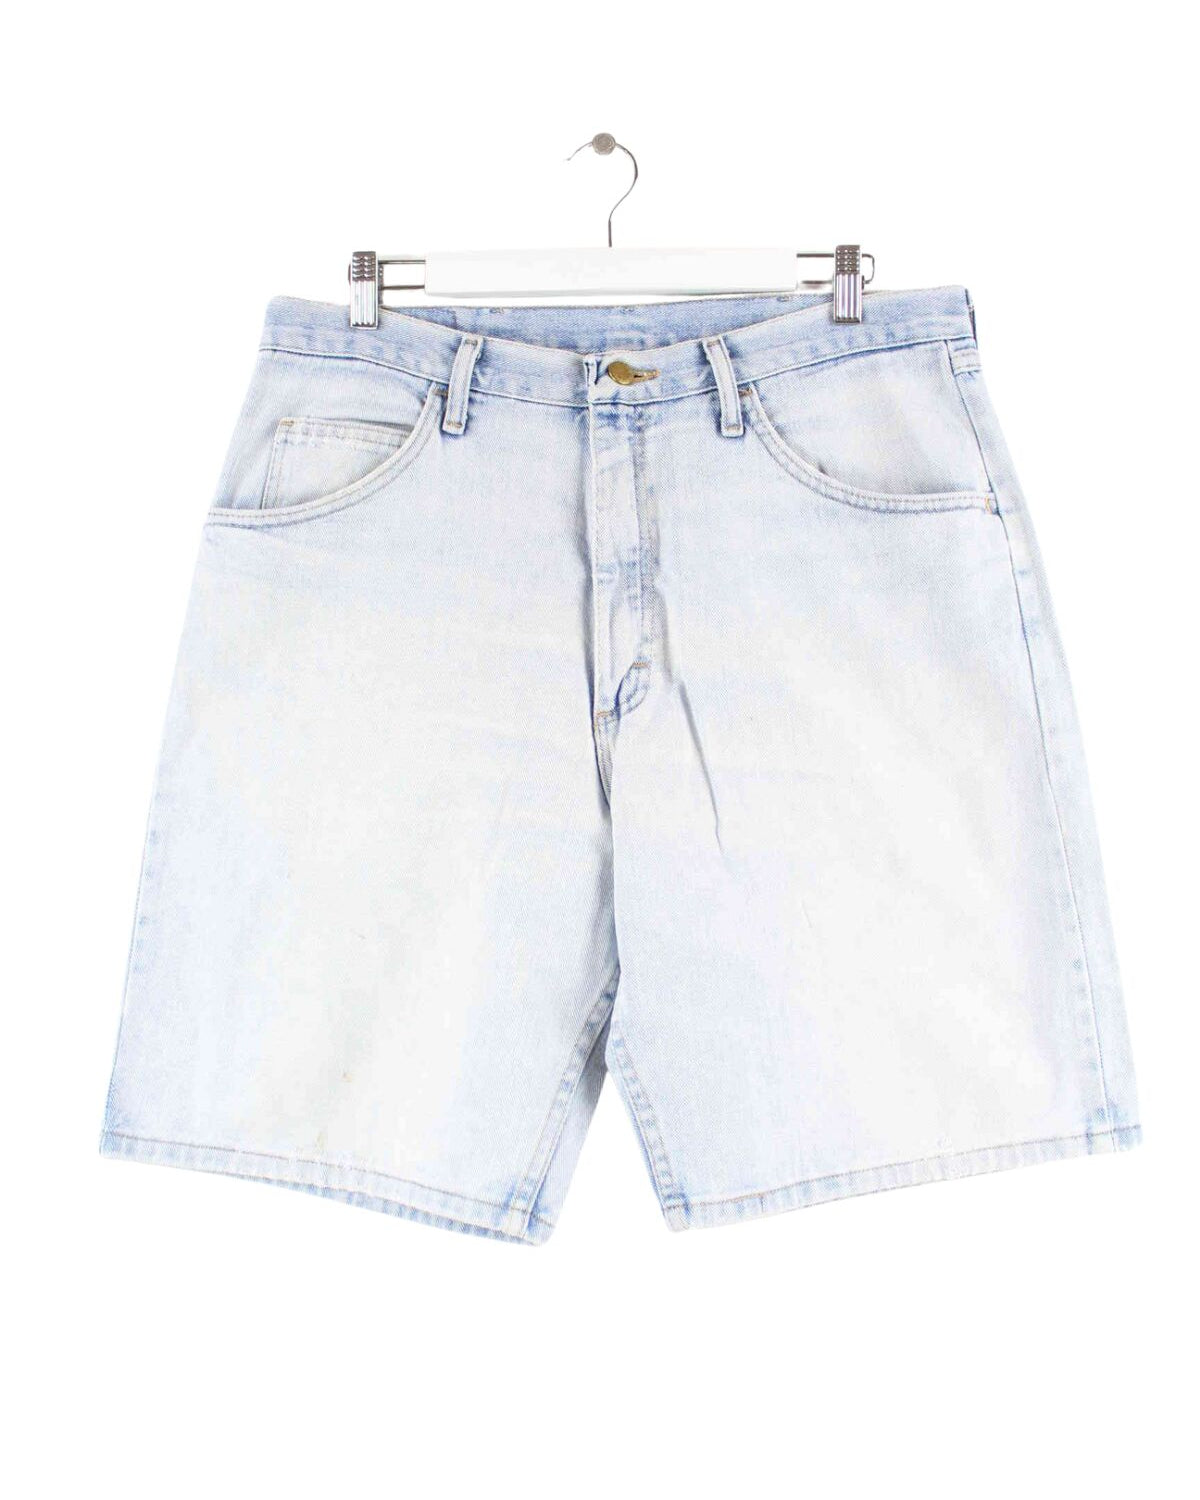 Wrangler Relaxed Fit Jeans Shorts Blau W34 (front image)